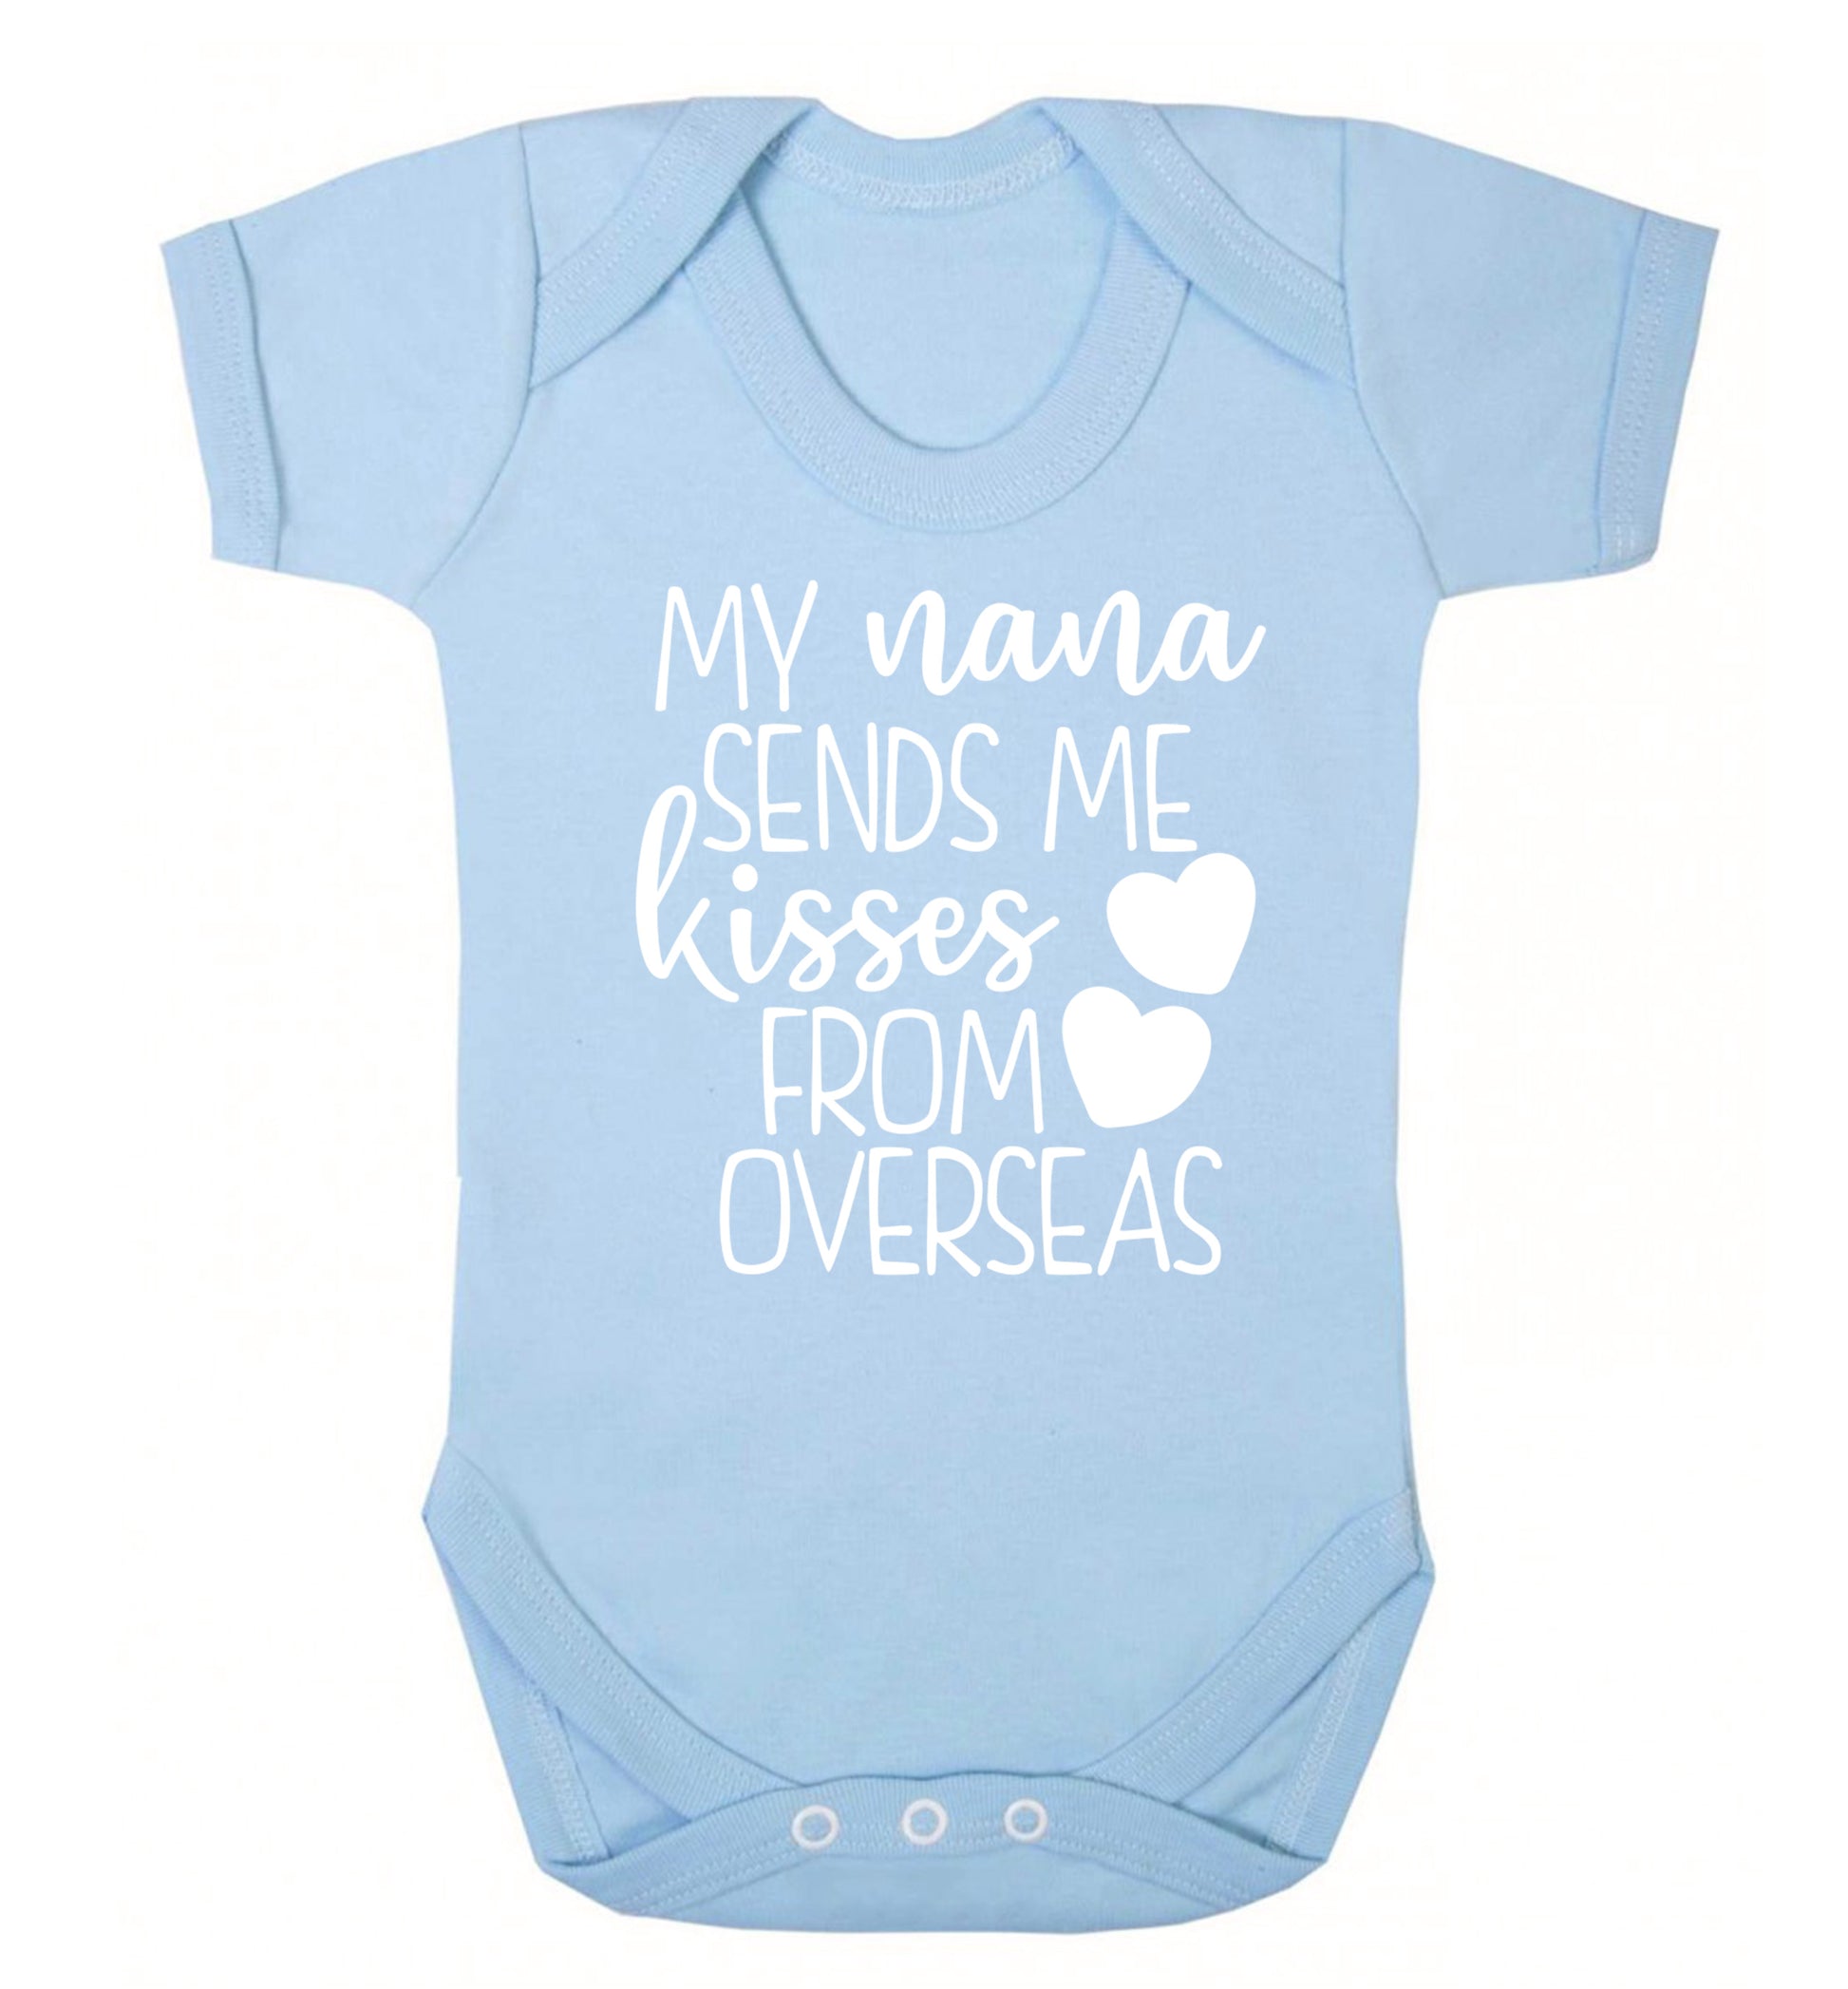 My nana sends me kisses from overseas Baby Vest pale blue 18-24 months